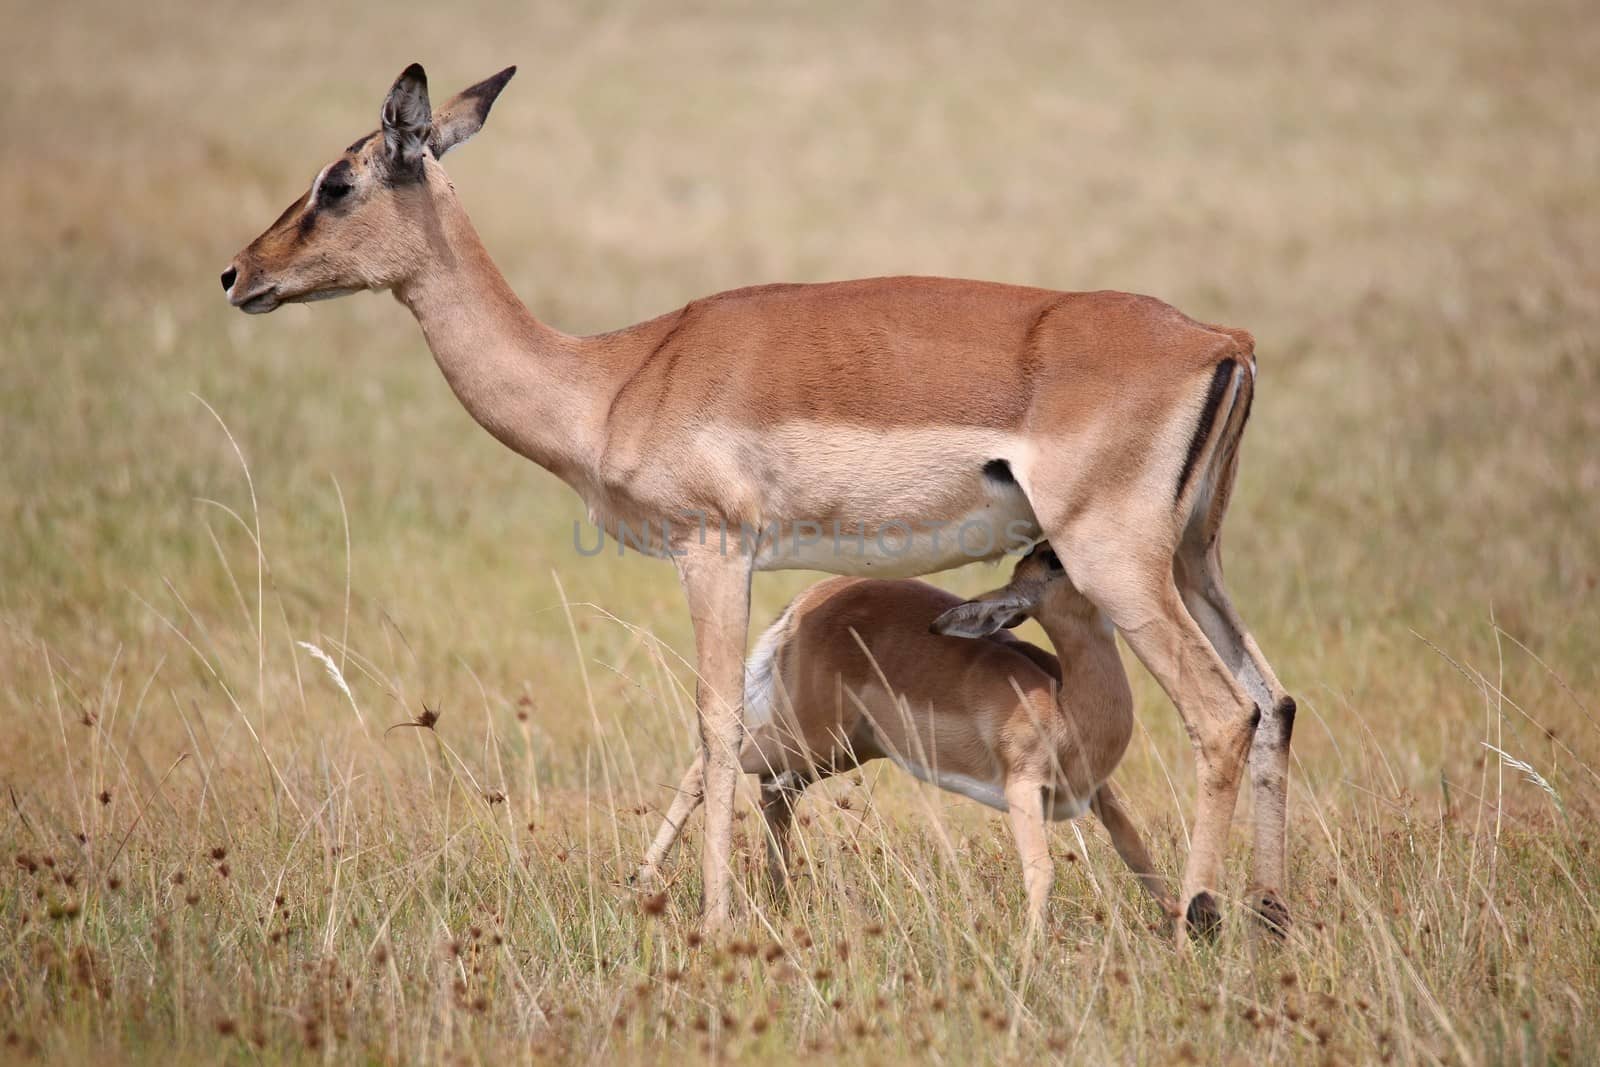 Impala young suckling from it's mother on the grassland in Africa